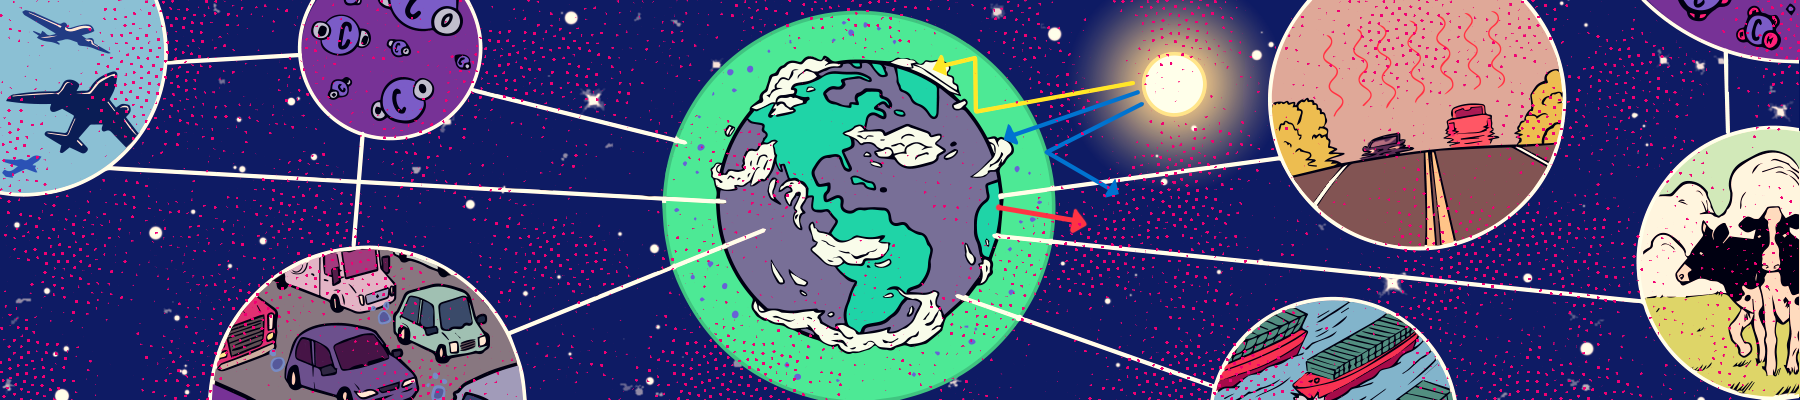 Illustrated header image for the greenhouse effect